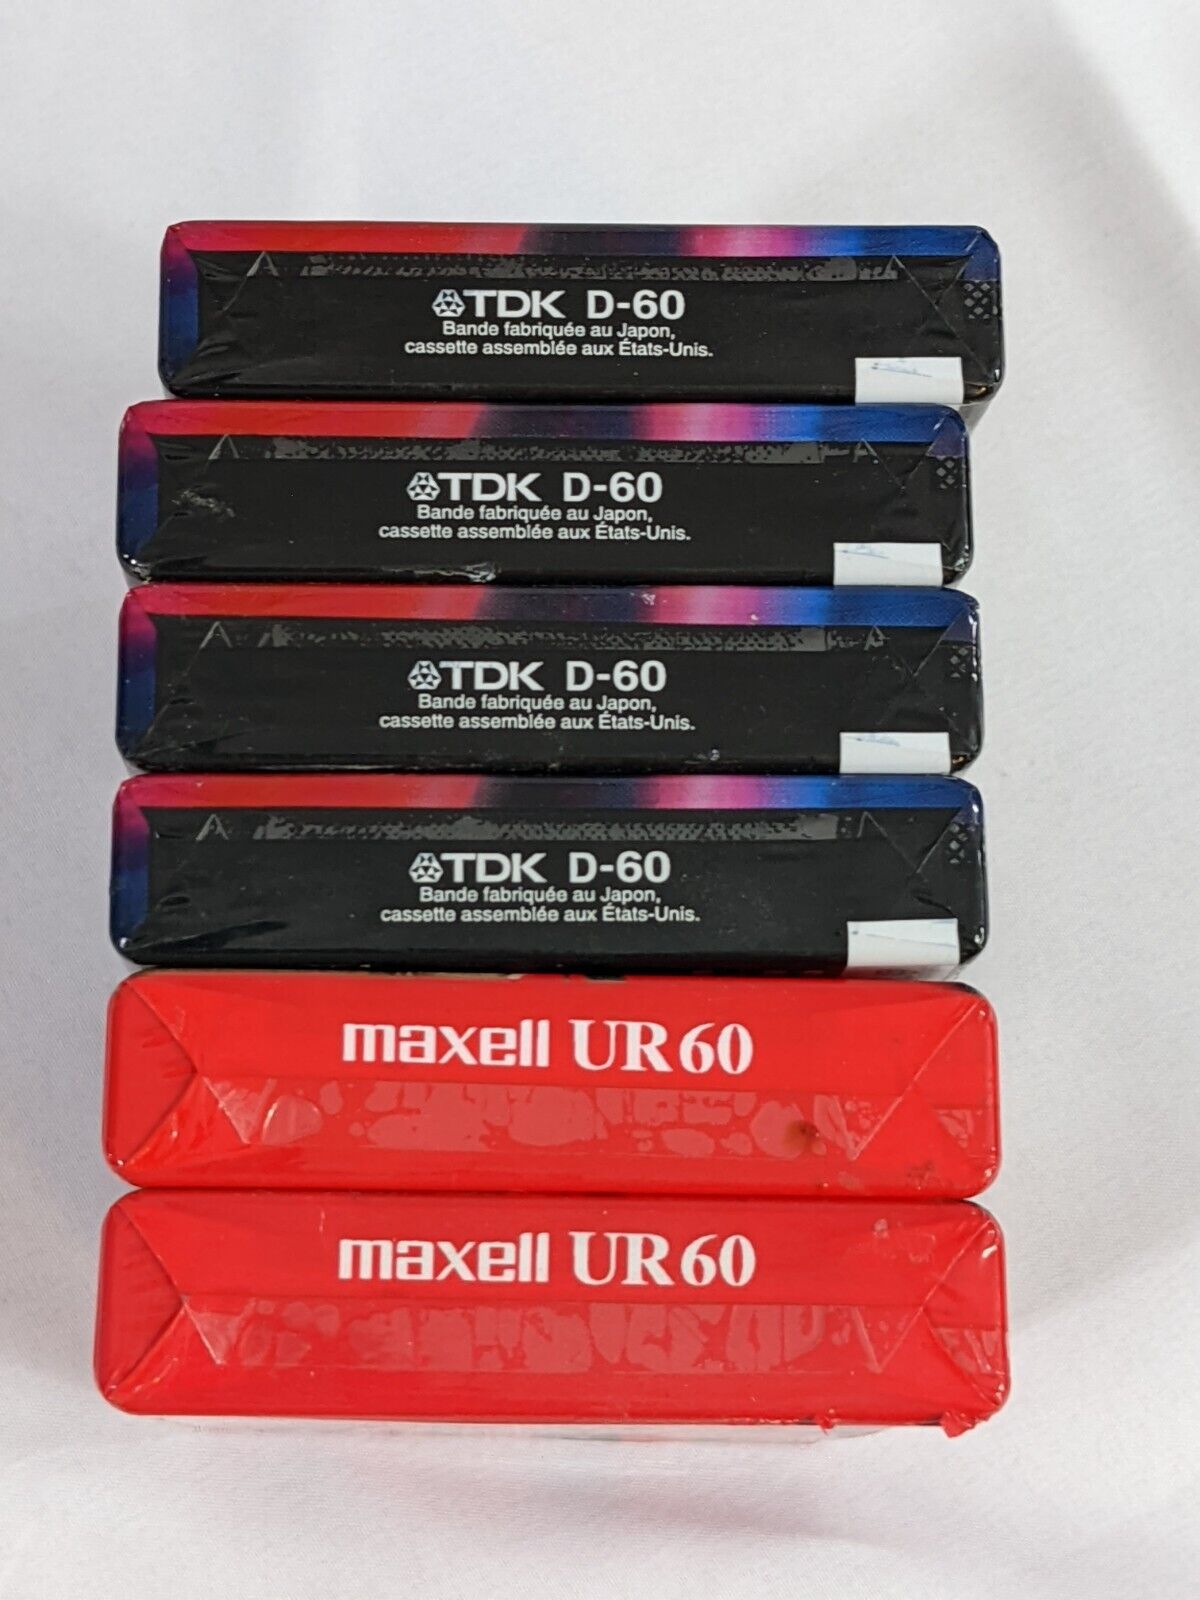 TDK D60 High Output & Maxell UR60 Normal Bias Audio Cassette Tapes Lot of 6